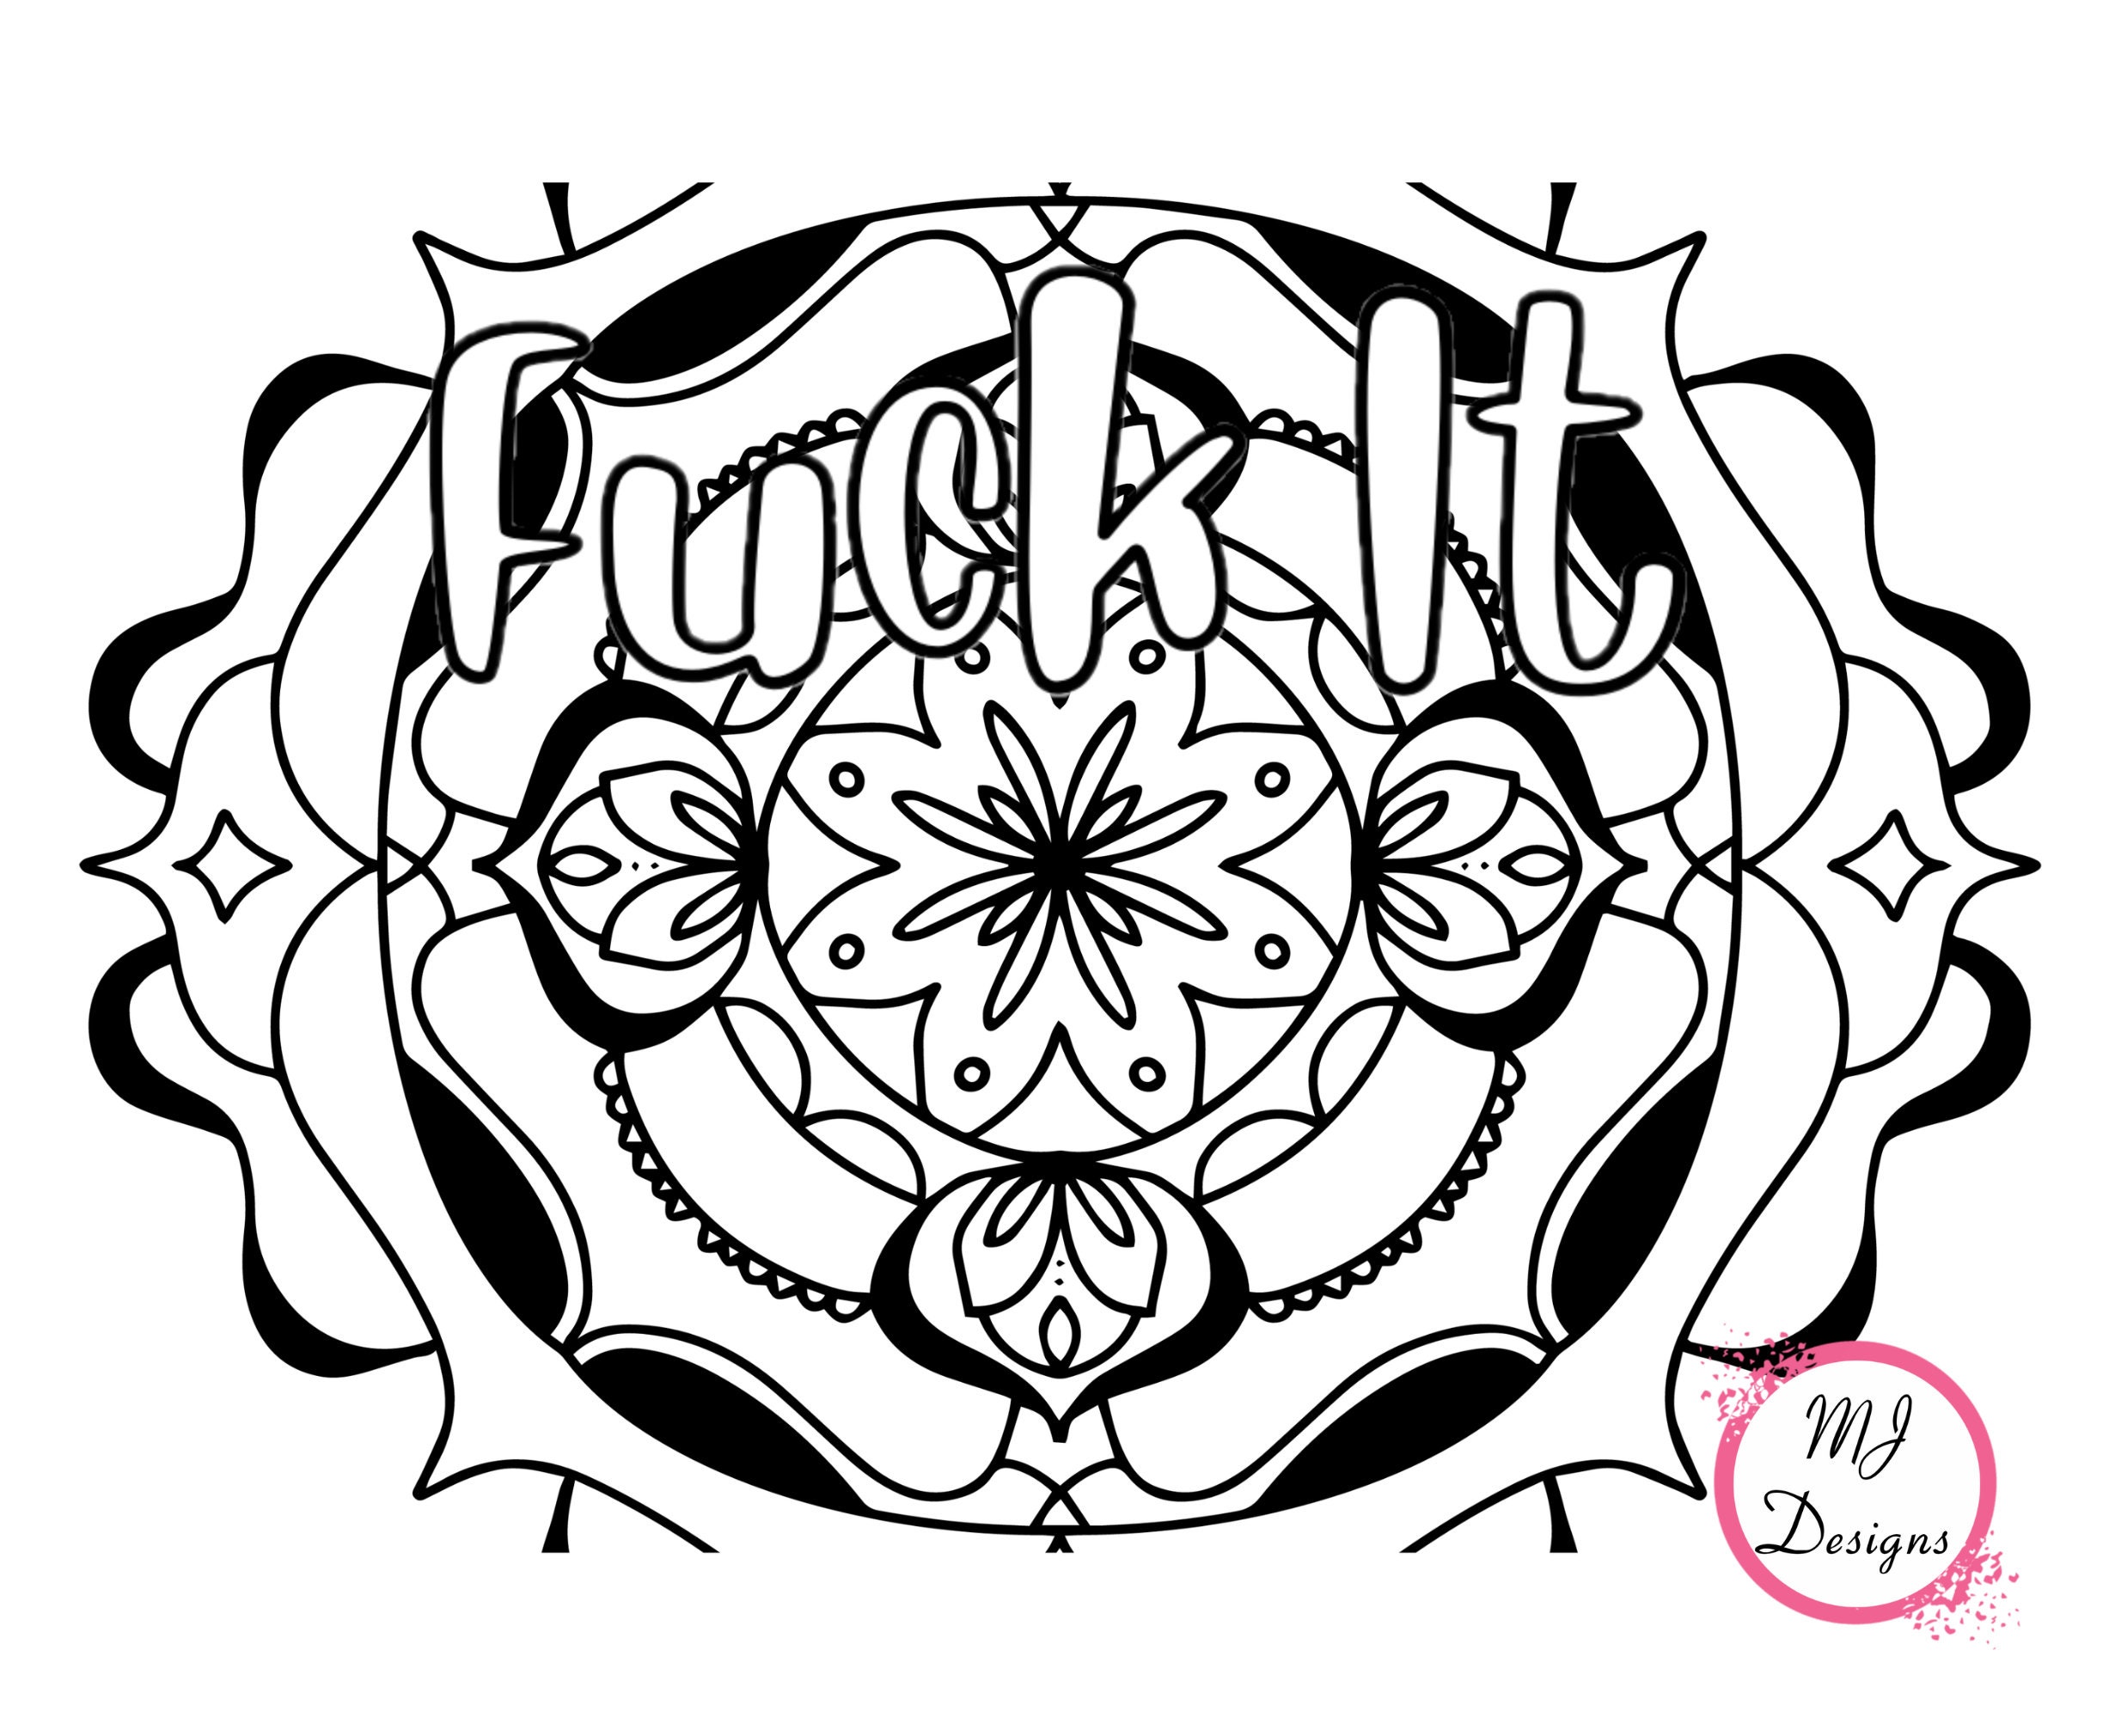 Bumble Fuck Swear Word Coloring Book for Adults: swear word coloring book  for adults stress relieving designs 8.5 X 11 Mandala Designs 54 Pages  (Paperback)